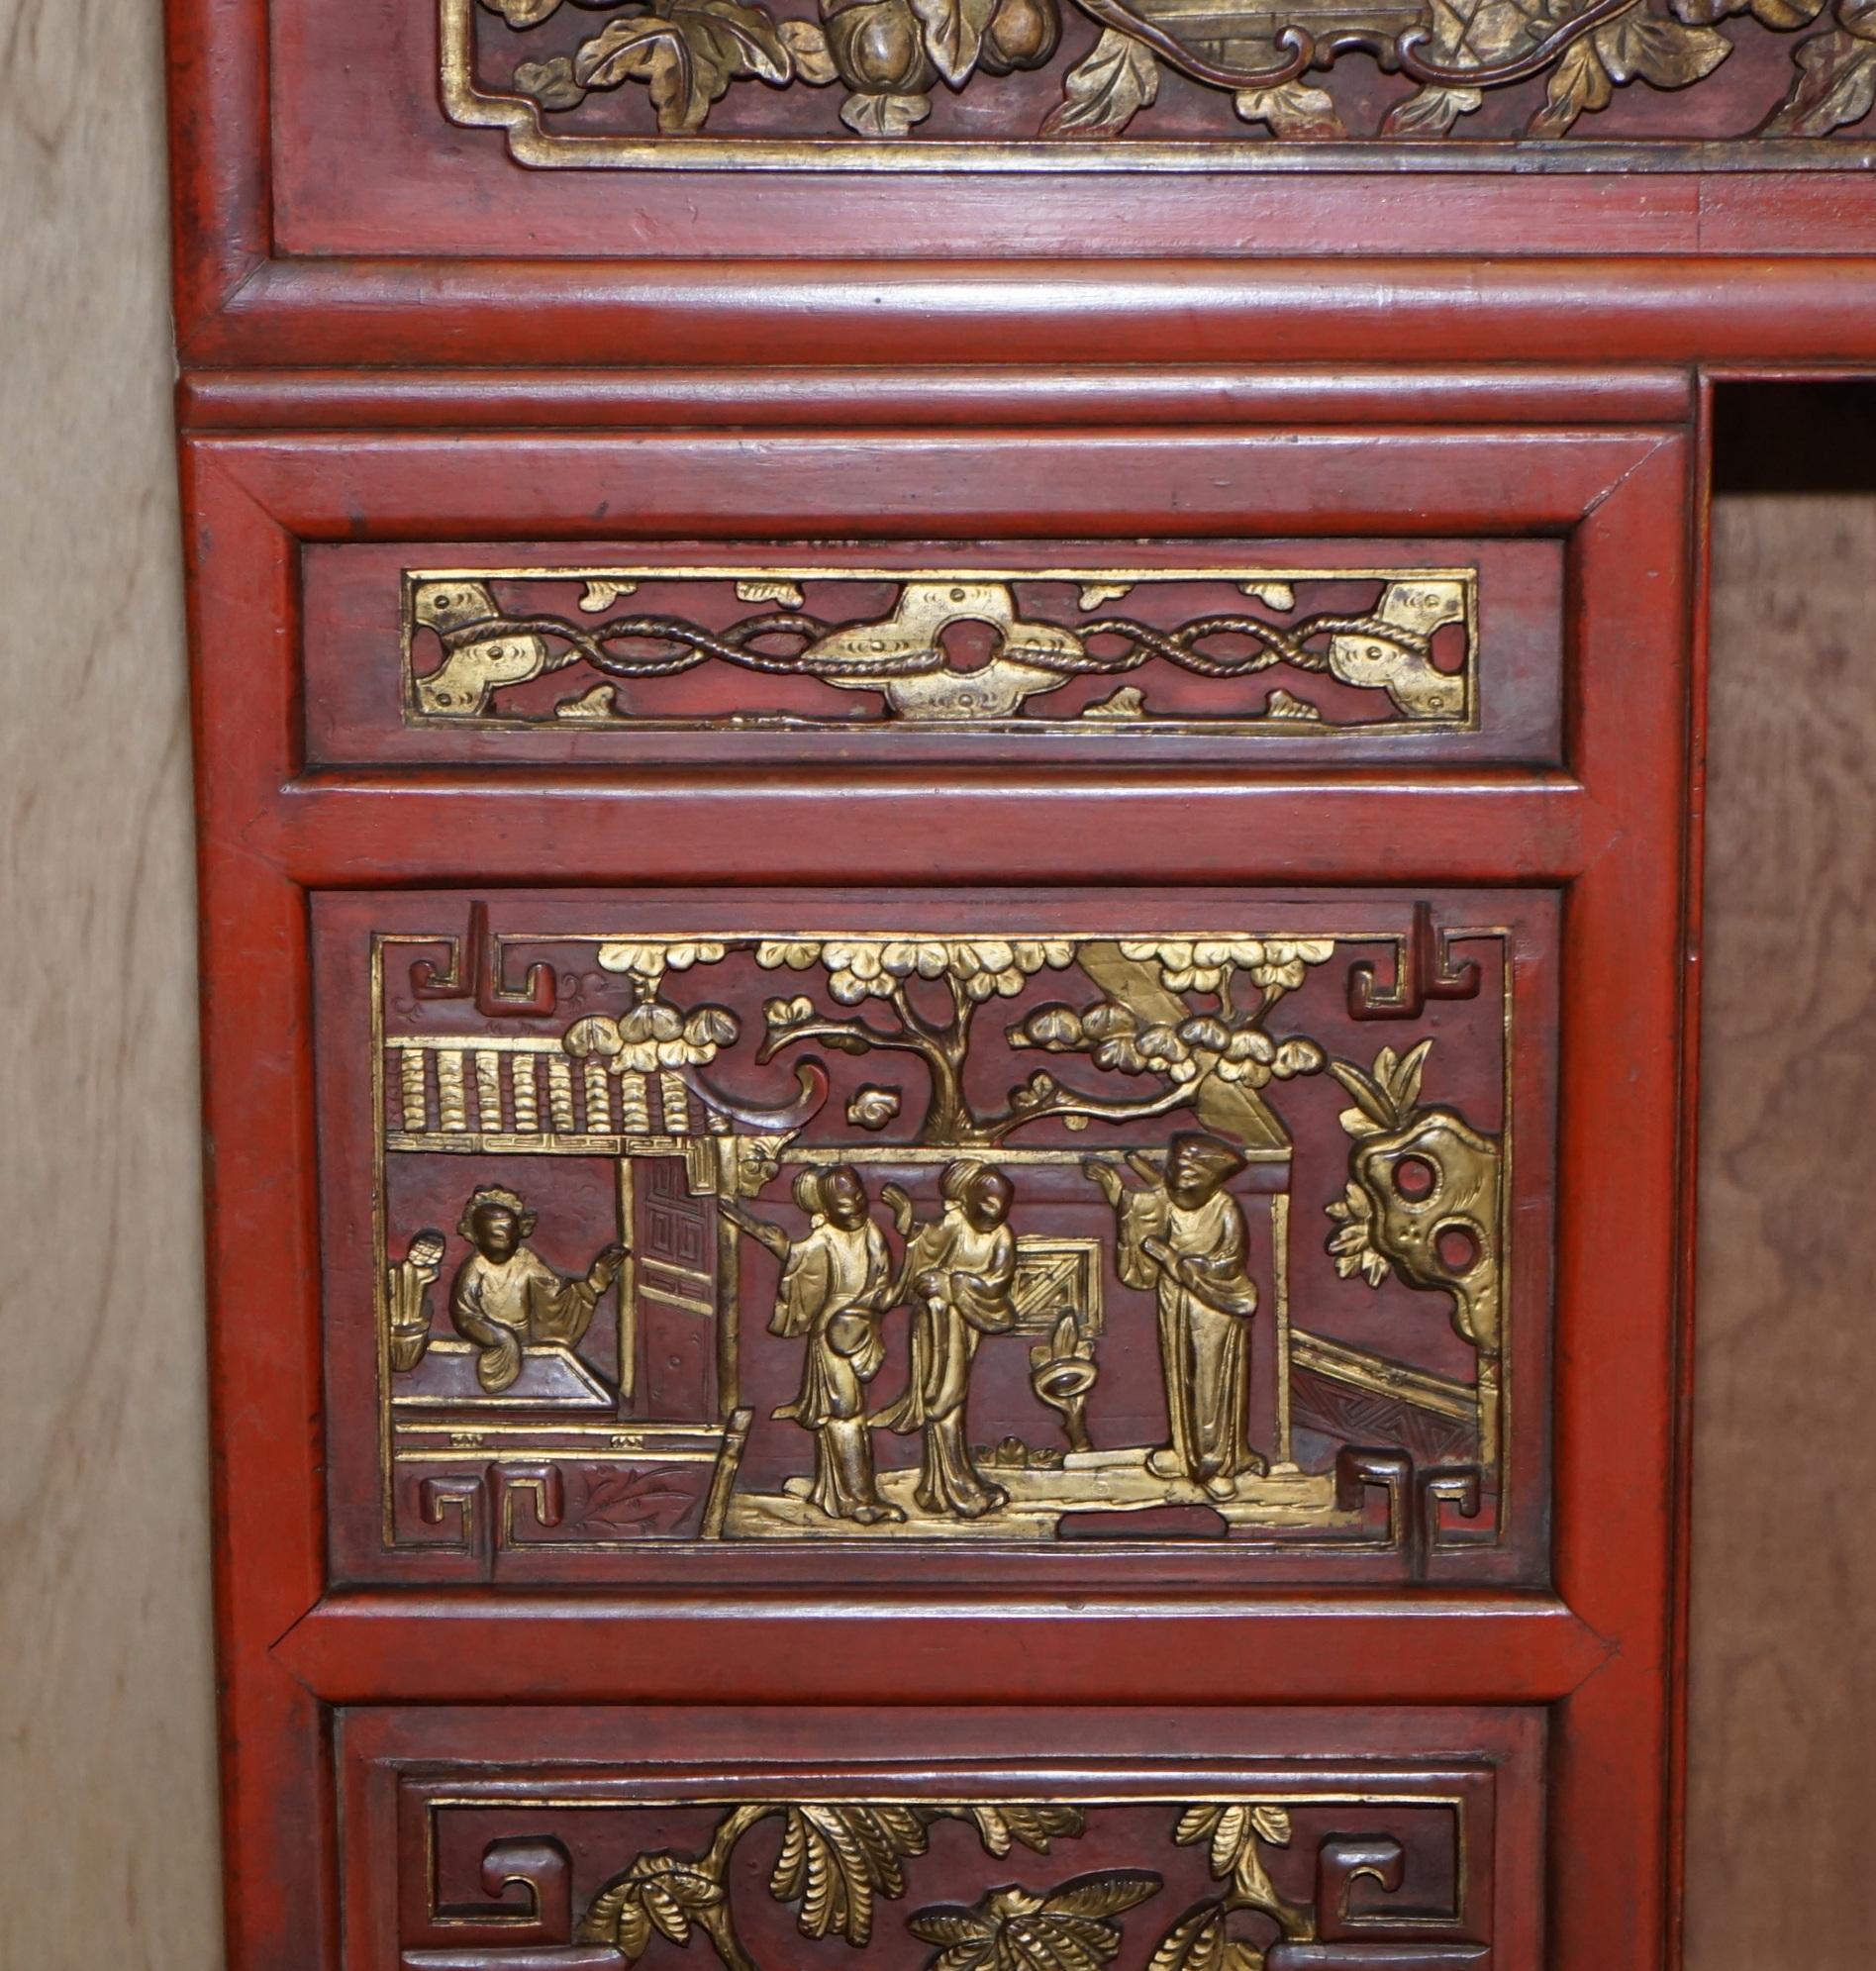 Hand-Crafted circa 1920's Chinese Fret Work Carved Red & Gold Painted Fire Surround Mantle